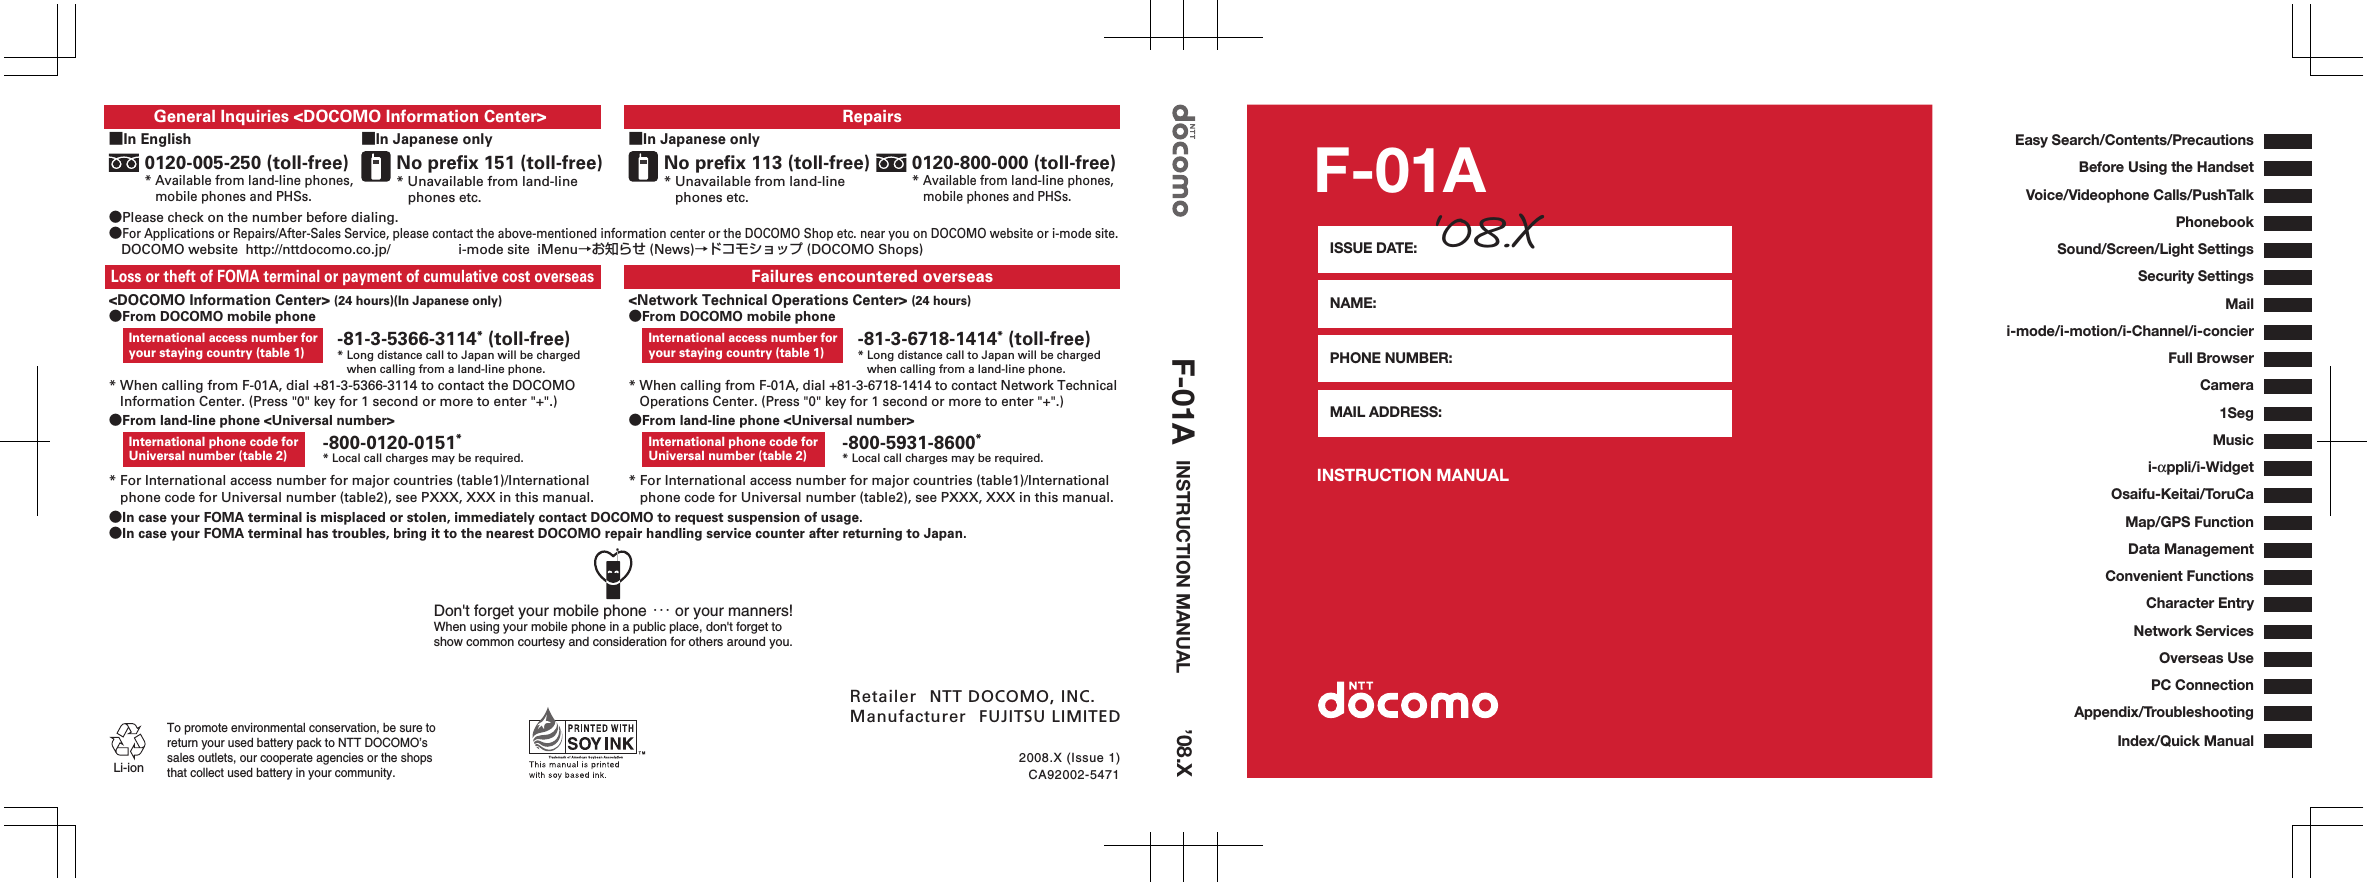 INSTRUCTION MANUAL F-01AISSUE DATE: NAME: PHONE NUMBER: MAIL ADDRESS: ‘08.XCA92002-54712008.X (Issue 1)●In case your FOMA terminal is misplaced or stolen, immediately contact DOCOMO to request suspension of usage.●In case your FOMA terminal has troubles, bring it to the nearest DOCOMO repair handling service counter after returning to Japan.■In Japanese onlyRepairs 0120-800-000 (toll-free)* Available from land-line phones,     mobile phones and PHSs.No prefix 113 (toll-free)* Unavailable from land-line phones etc.■In English ■In Japanese onlyGeneral Inquiries &lt;DOCOMO Information Center&gt; ●Please check on the number before dialing.●For Applications or Repairs/After-Sales Service, please contact the above-mentioned information center or the DOCOMO Shop etc. near you on DOCOMO website or i-mode site.DOCOMO website  http://nttdocomo.co.jp/     i-mode site  iMenu→お知らせ (News)→ドコモショップ (DOCOMO Shops)No prefix 151 (toll-free)* Unavailable from land-line phones etc.0120-005-250 (toll-free)* Available from land-line phones,     mobile phones and PHSs.* When calling from F-01A, dial +81-3-5366-3114 to contact the DOCOMO    Information Center. (Press &quot;0&quot; key for 1 second or more to enter &quot;+&quot;.)Failures encountered overseas Loss or theft of FOMA terminal or payment of cumulative cost overseas &lt;DOCOMO Information Center&gt; (24 hours)(In Japanese only)●From DOCOMO mobile phoneInternational access number for your staying country (table 1)* When calling from F-01A, dial +81-3-6718-1414 to contact Network Technical    Operations Center. (Press &quot;0&quot; key for 1 second or more to enter &quot;+&quot;.)&lt;Network Technical Operations Center&gt; (24 hours)●From DOCOMO mobile phoneInternational access number for your staying country (table 1)●From land-line phone &lt;Universal number&gt;* For International access number for major countries (table1)/International    phone code for Universal number (table2), see PXXX, XXX in this manual.International phone code for Universal number (table 2)●From land-line phone &lt;Universal number&gt;* For International access number for major countries (table1)/International    phone code for Universal number (table2), see PXXX, XXX in this manual.International phone code for Universal number (table 2)-81-3-5366-3114* (toll-free)* Long distance call to Japan will be charged    when calling from a land-line phone.-81-3-6718-1414* (toll-free)* Long distance call to Japan will be charged    when calling from a land-line phone.-800-0120-0151* * Local call charges may be required. -800-5931-8600** Local call charges may be required.Li-ionTo promote environmental conservation, be sure toreturn your used battery pack to NTT DOCOMO’s sales outlets, our cooperate agencies or the shops that collect used battery in your community.Don&apos;t forget your mobile phone ･･･ or your manners!When using your mobile phone in a public place, don&apos;t forget to show common courtesy and consideration for others around you.Retailer  NTT DOCOMO, INC.Manufacturer  FUJITSU LIMITEDINSTRUCTION MANUAL F-01A ’08.XEasy Search/Contents/PrecautionsBefore Using the HandsetAppendix/TroubleshootingConvenient FunctionsNetwork ServicesOverseas UseCharacter EntryPC ConnectionVoice/Videophone Calls/PushTalkPhonebookSound/Screen/Light SettingsSecurity SettingsMaili-mode/i-motion/i-Channel/i-concierFull BrowserCameraOsaifu-Keitai/ToruCa Map/GPS FunctionData Management1Segi-αppli/i-WidgetMusicIndex/Quick Manual